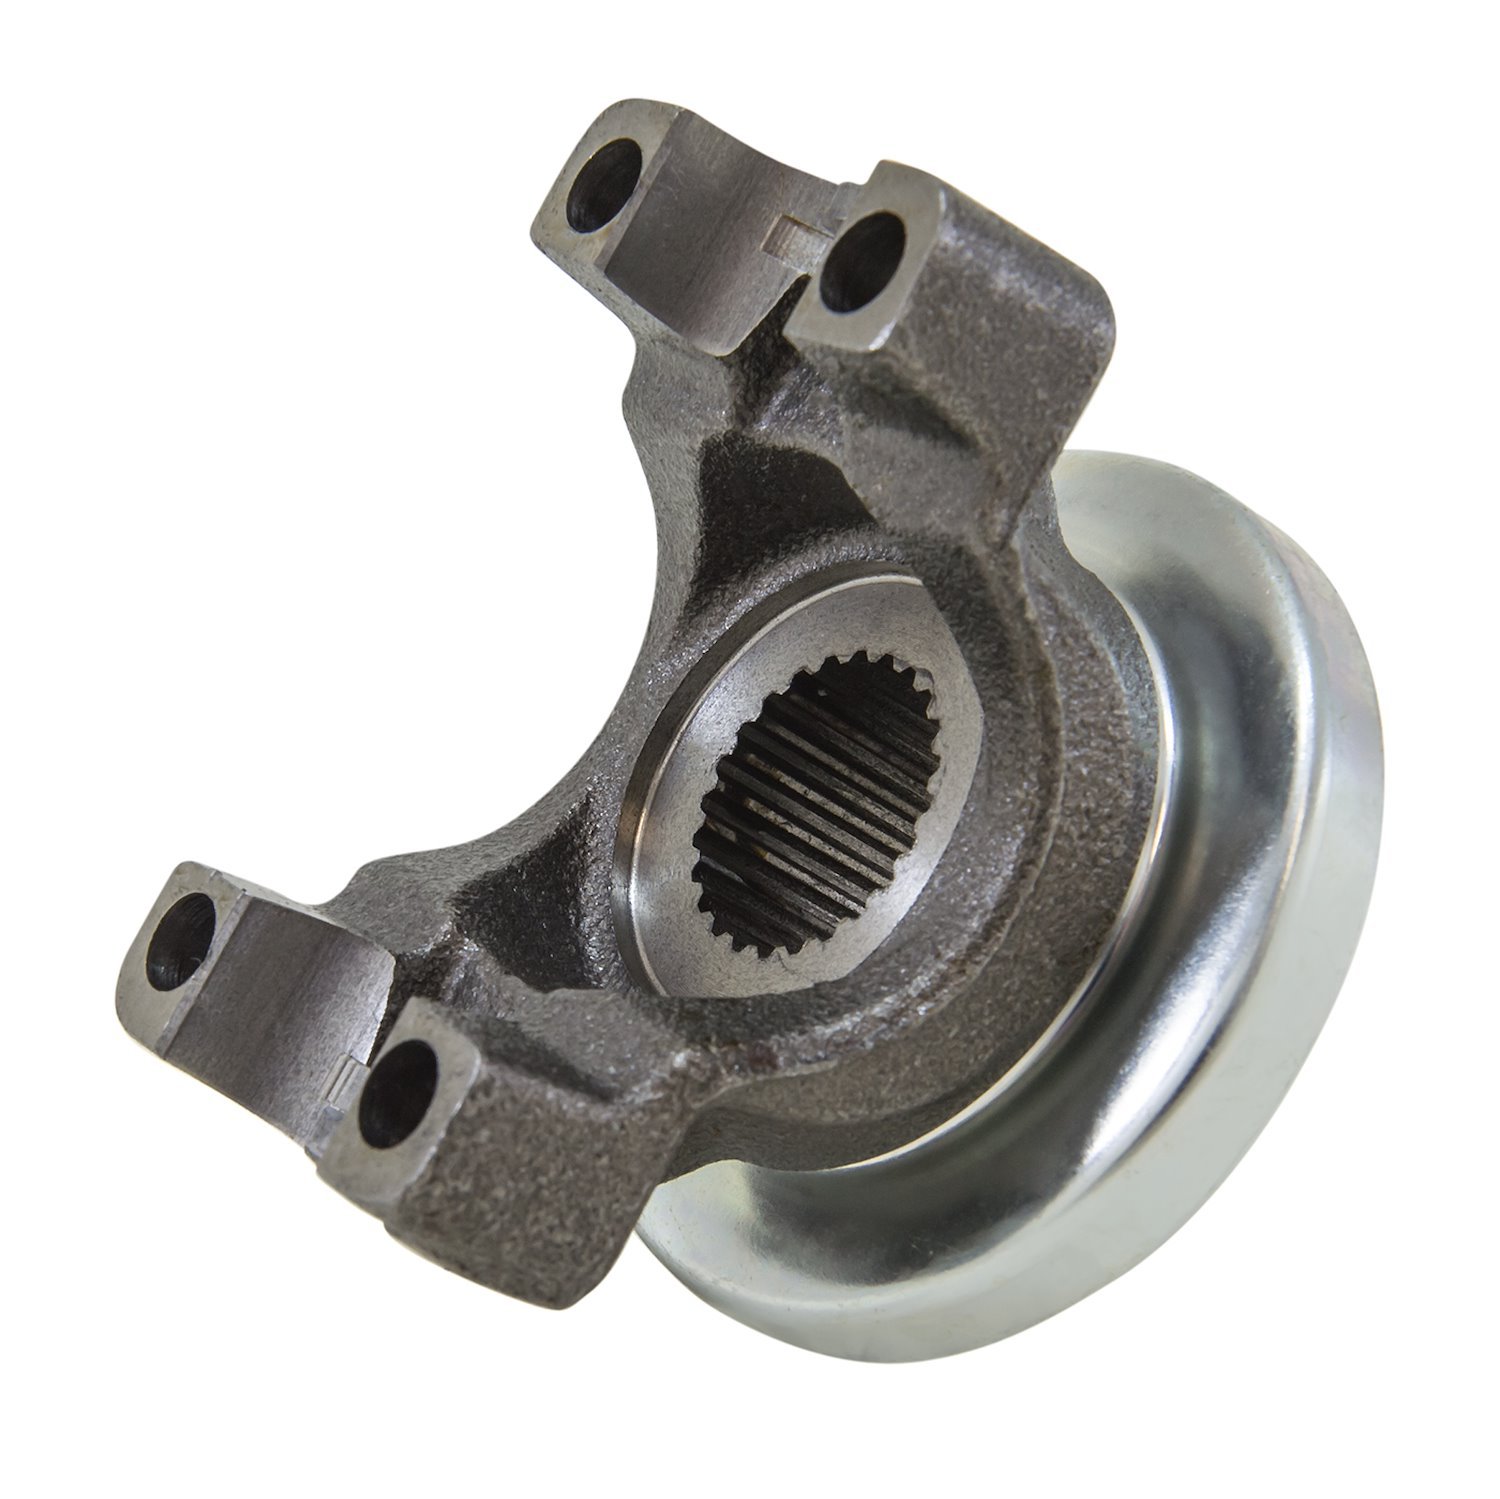 Replacement Yoke For Spicer 30 & 44 With 24 Spline Pinion, 1350 U-Joint